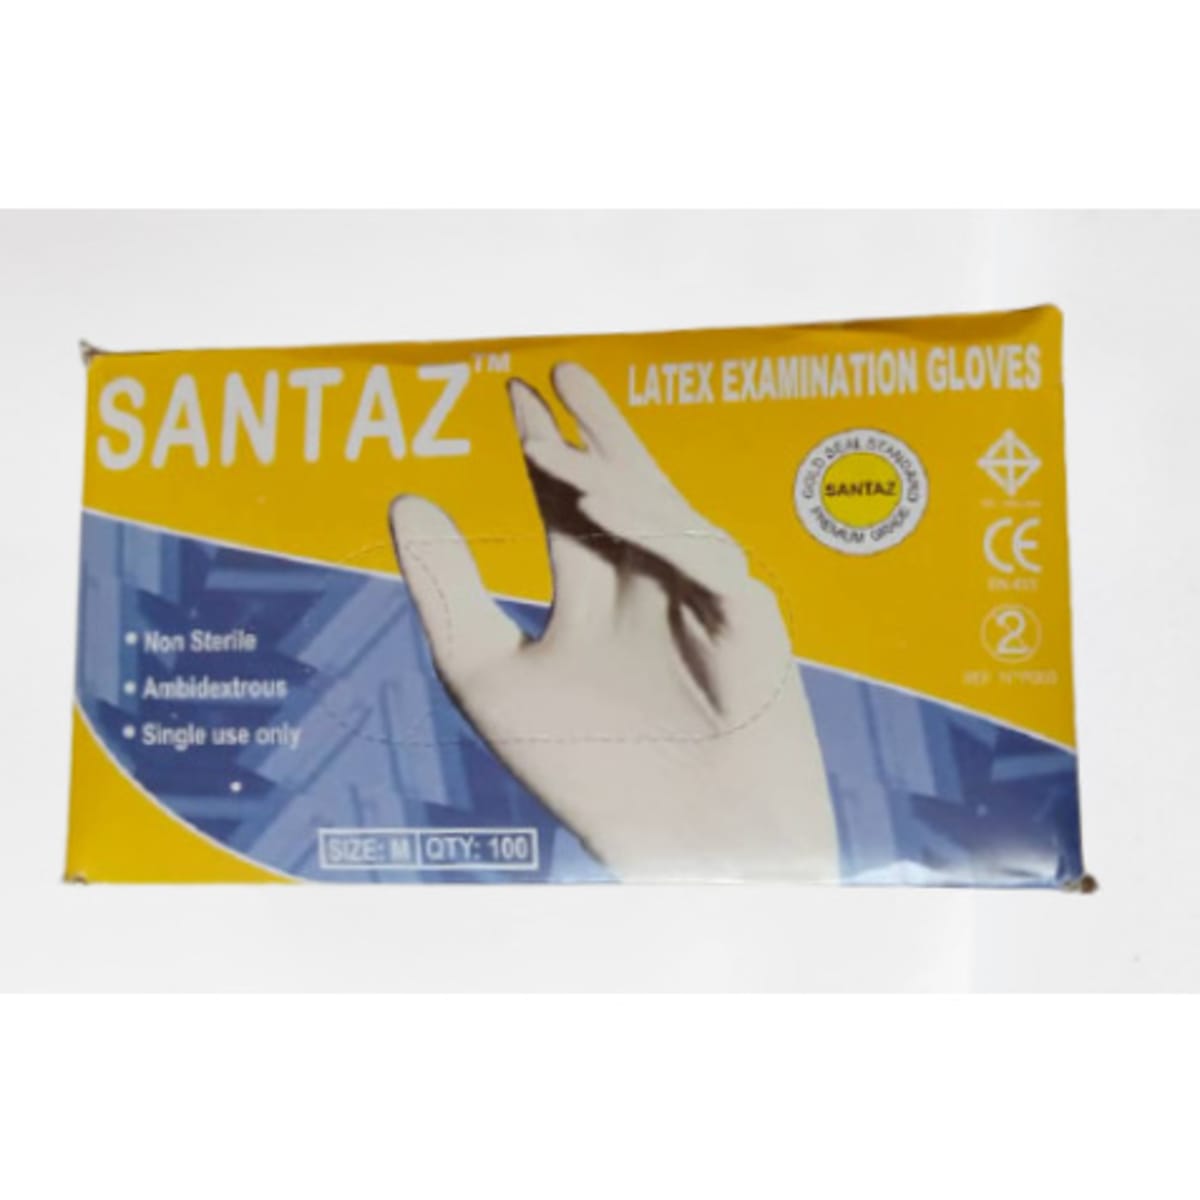 Santaz Latex Examination Hand Gloves Pack Of 50 Pairs - 100 Pieces   CartRollers ﻿Online Marketplace Shopping Store In Lagos Nigeria